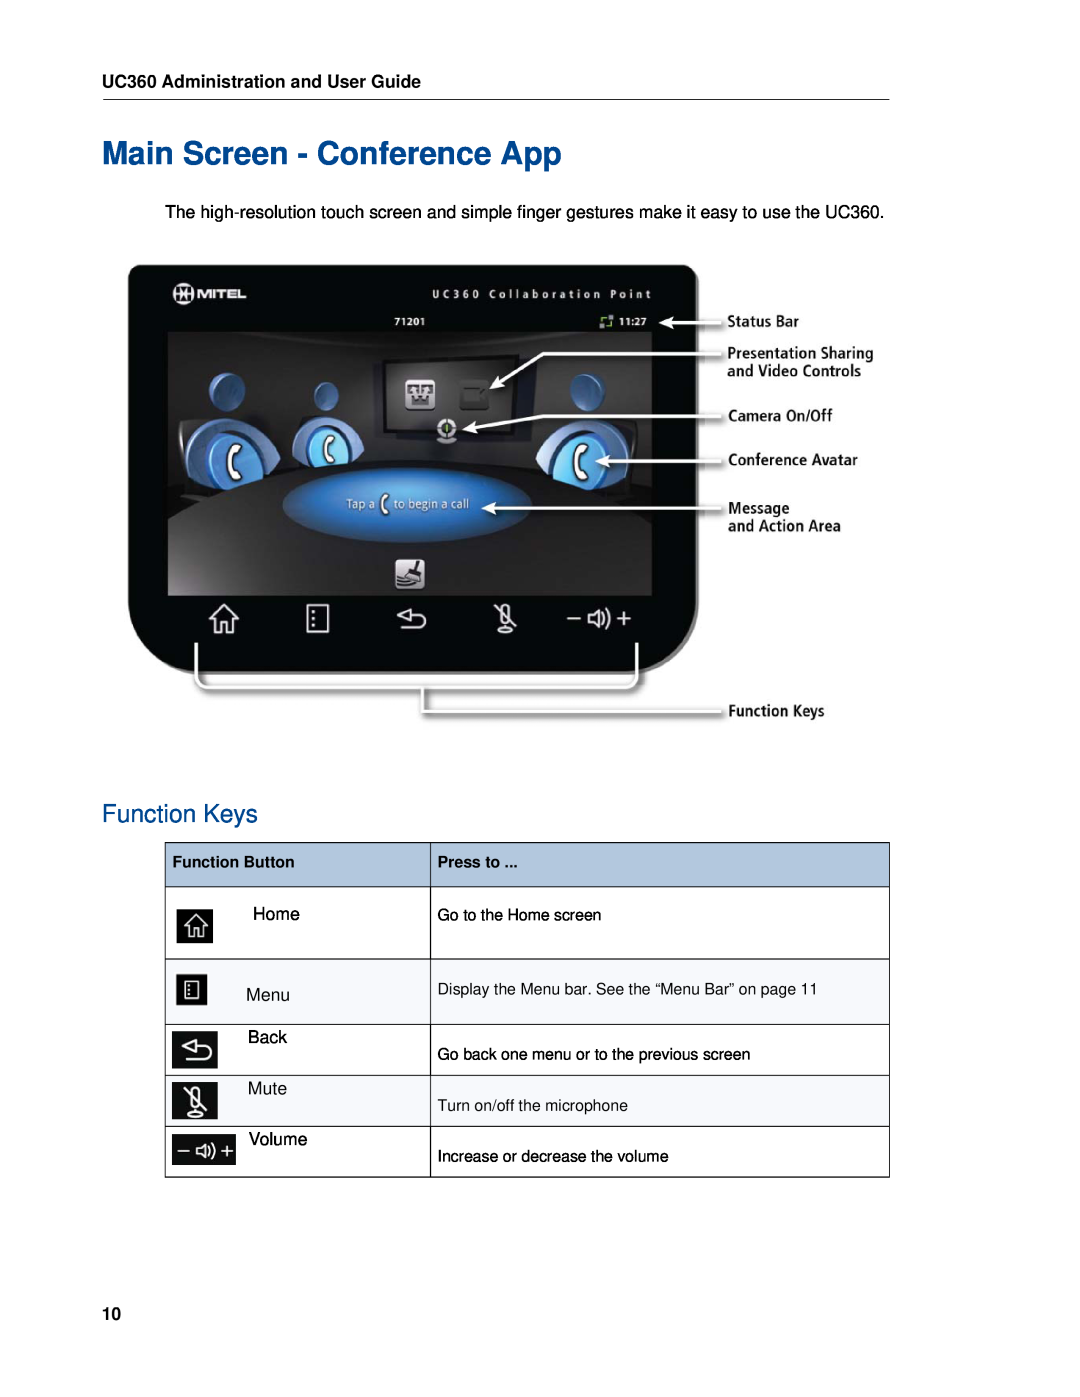 Mitel manual Main Screen - Conference App, Function Keys, UC360 Administration and User Guide, Function Button, Press to 